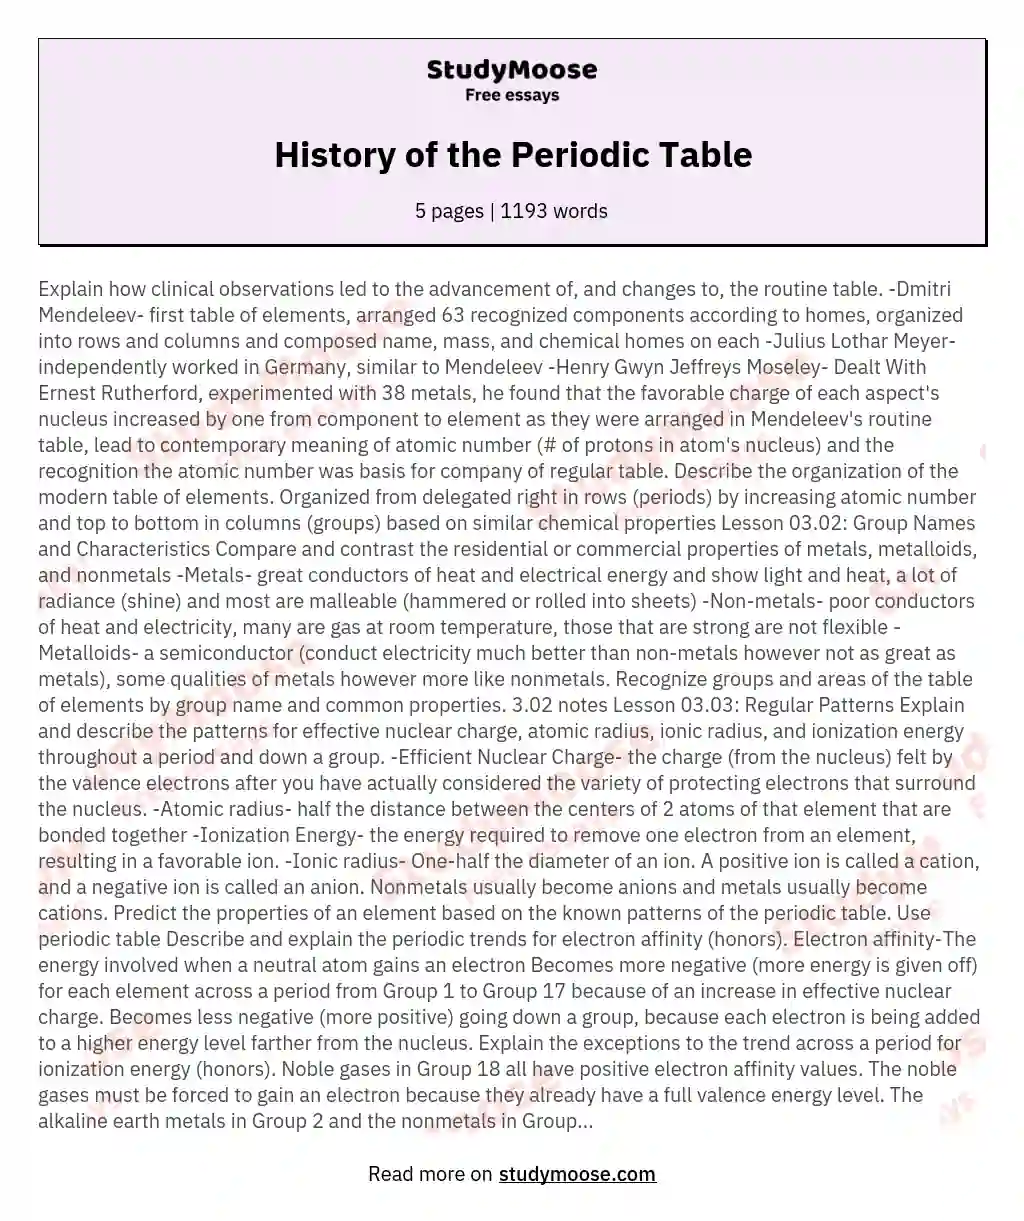 History of the Periodic Table essay